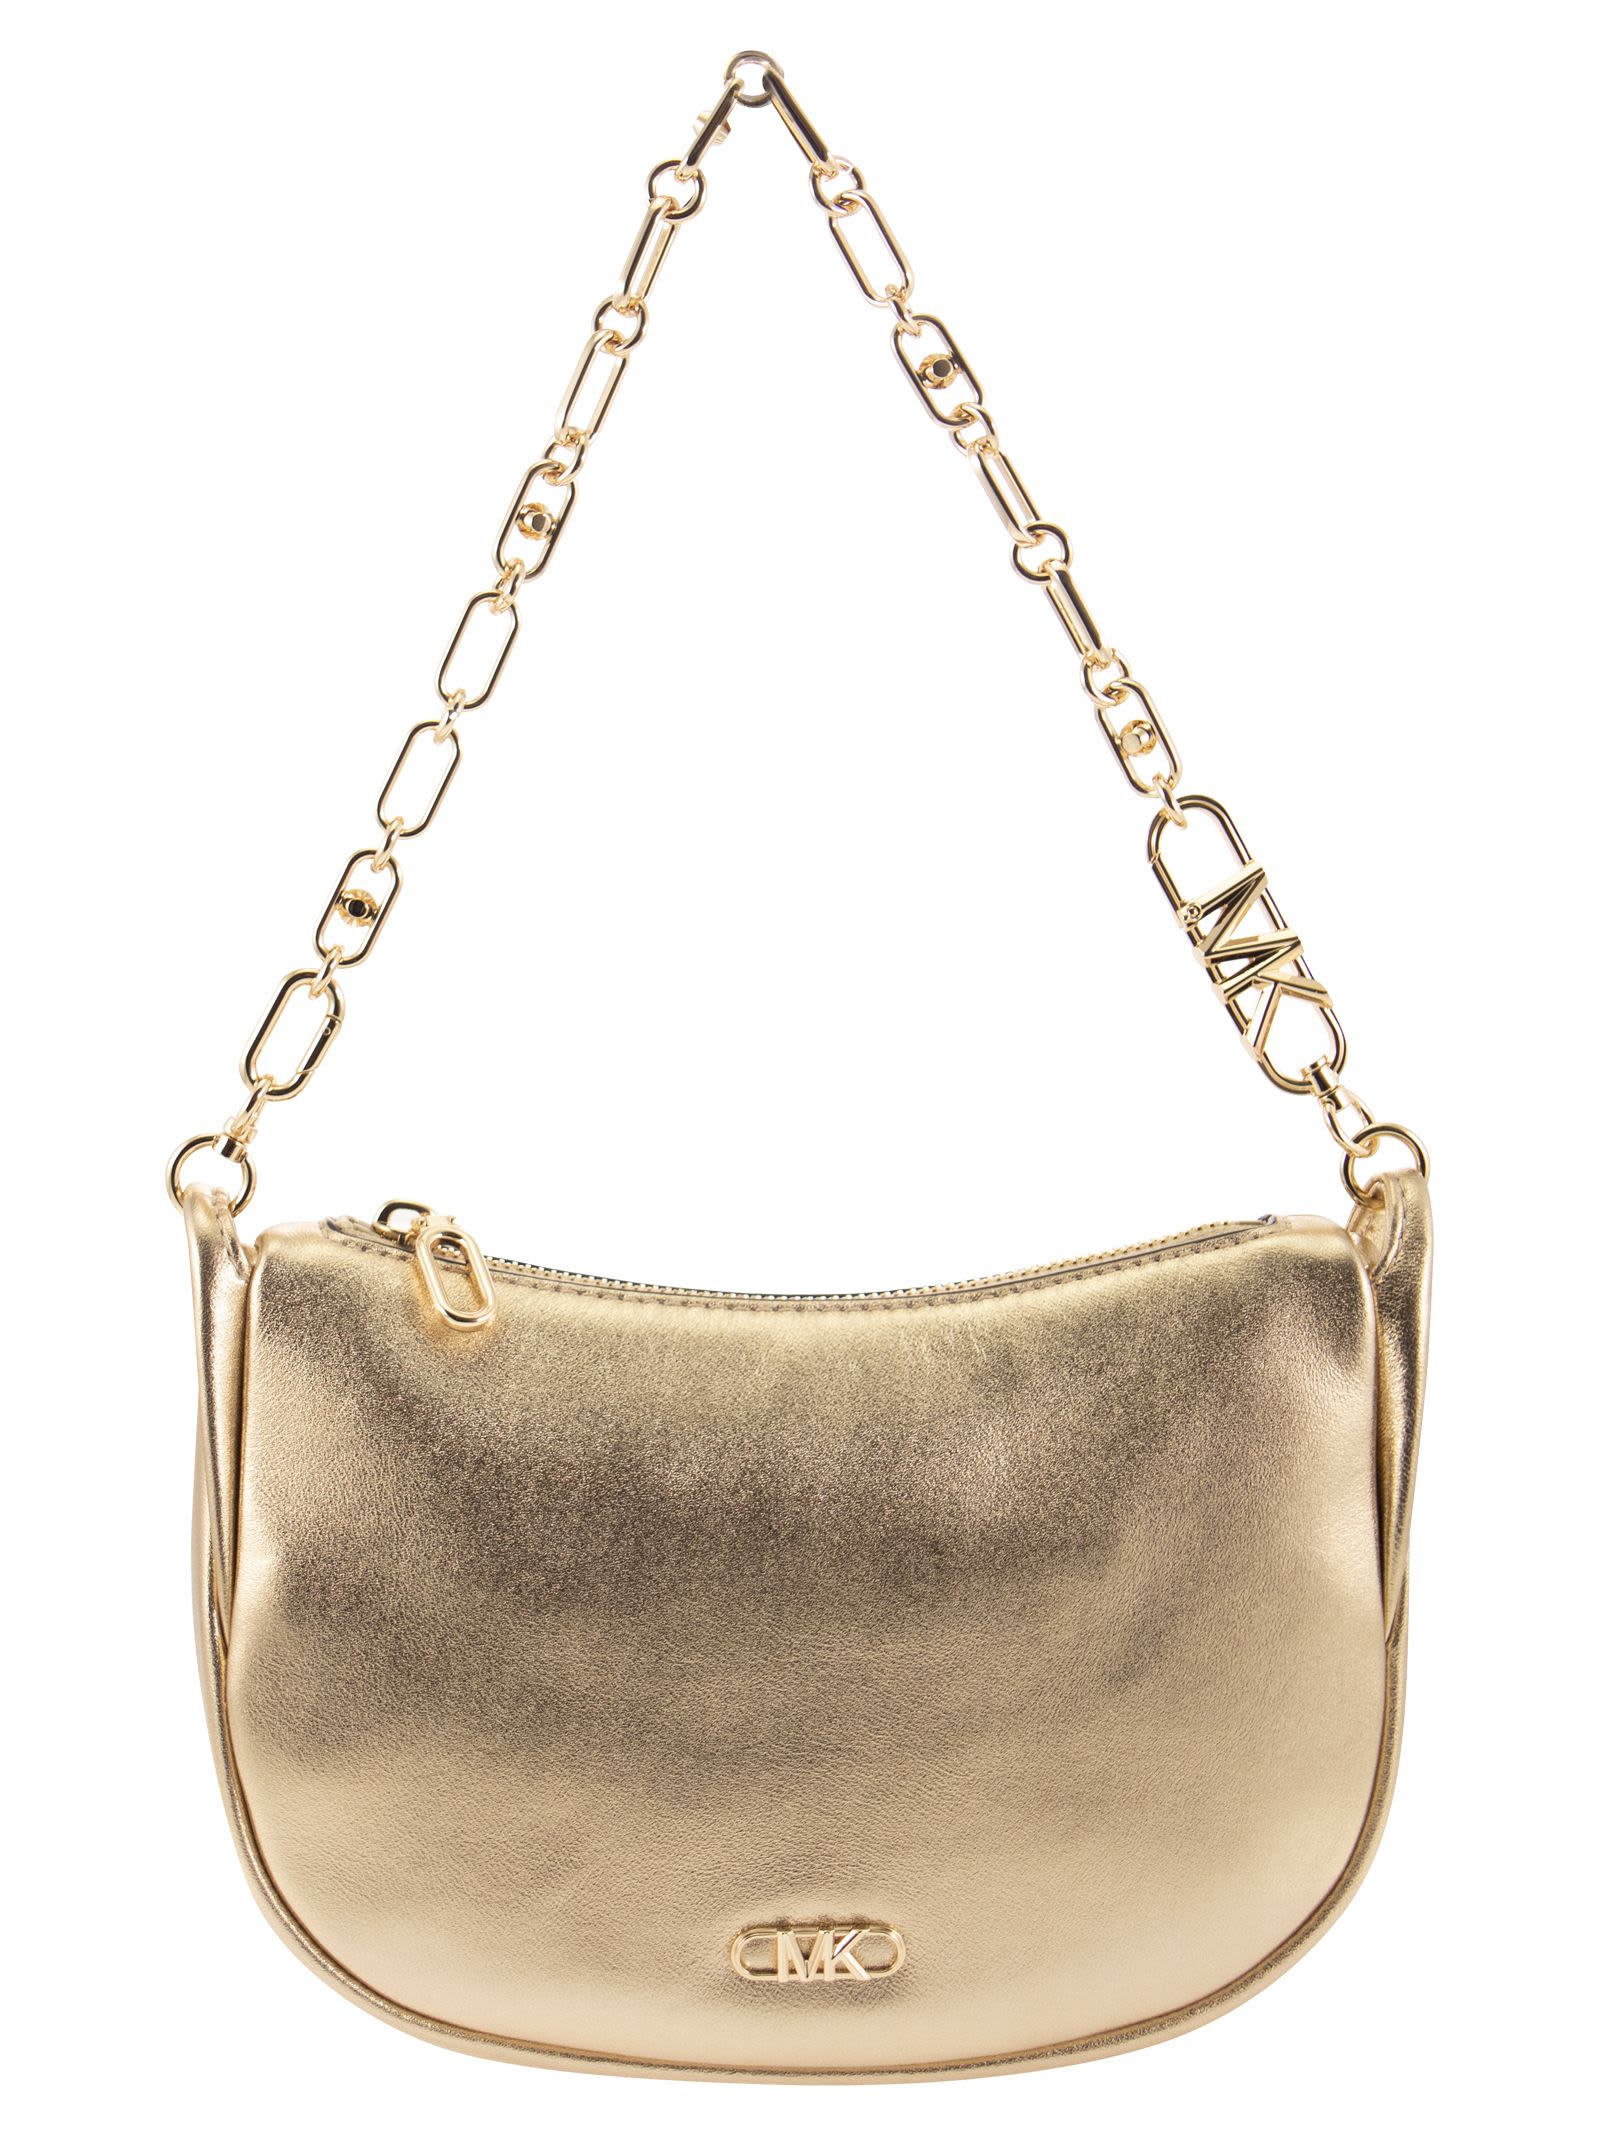 Michael Kors Kendall - Hand Clutch Bag In Gold